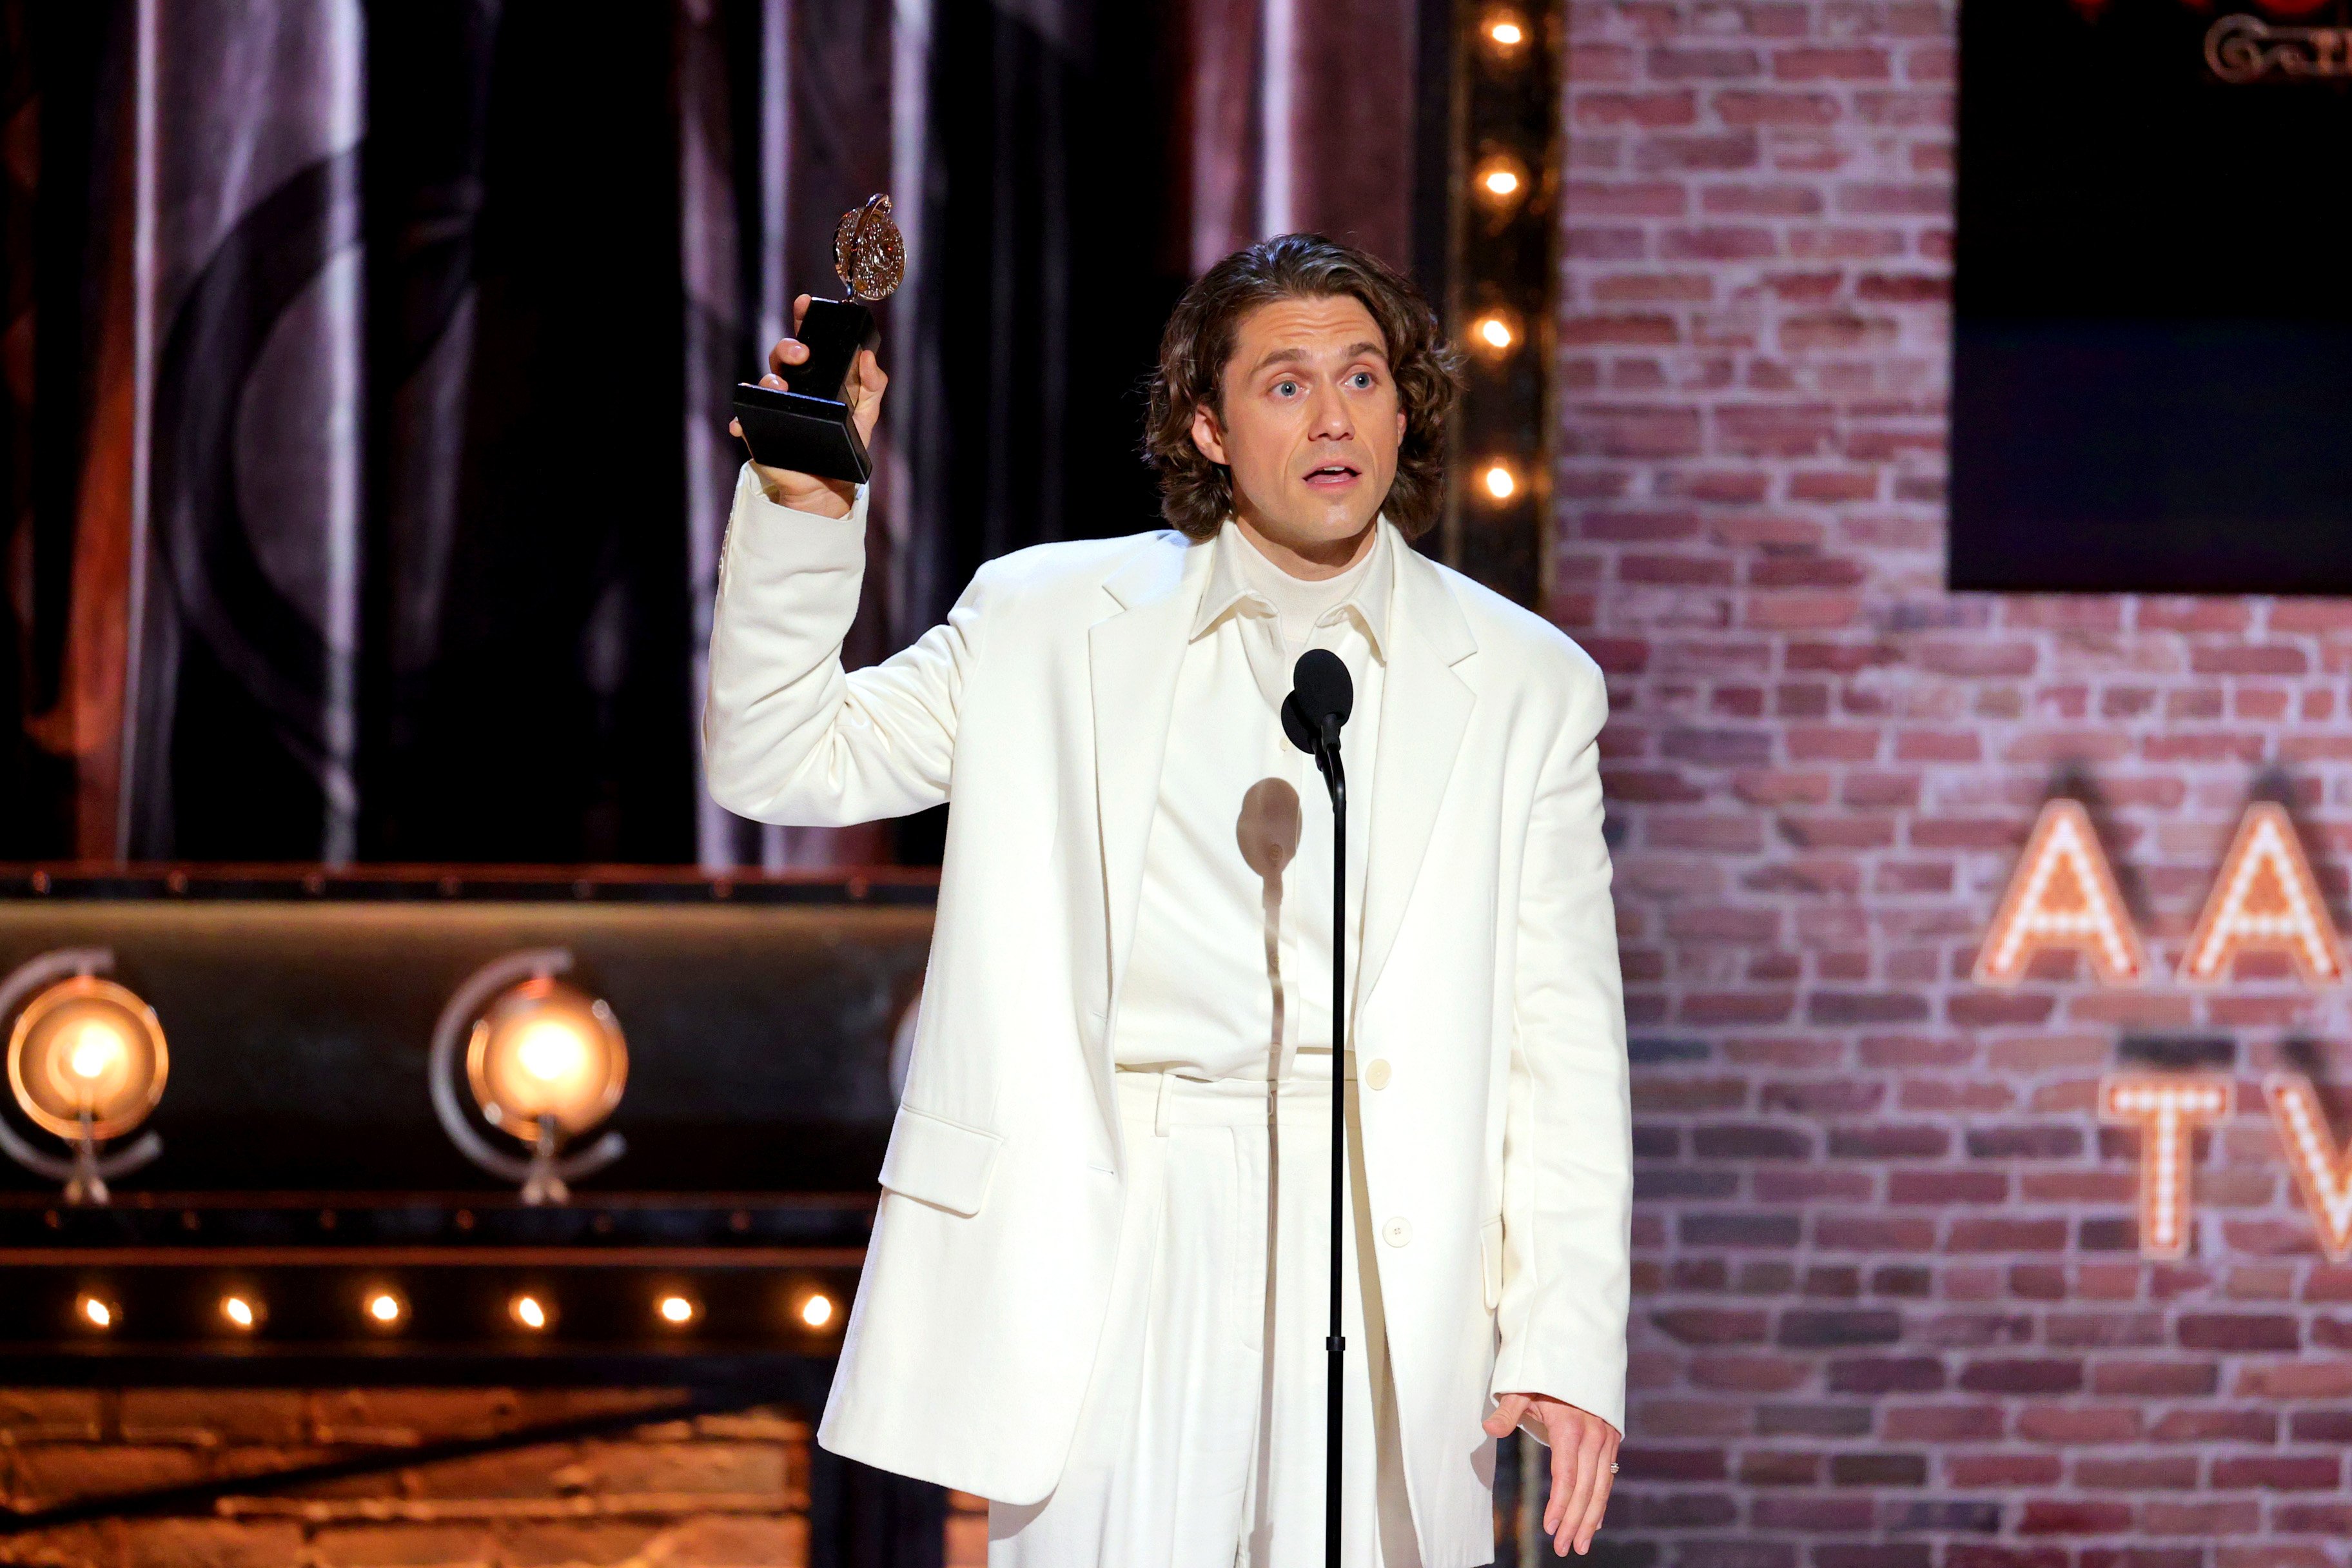 Aaron Tveit holds up a Tony Award while wearing a white suit